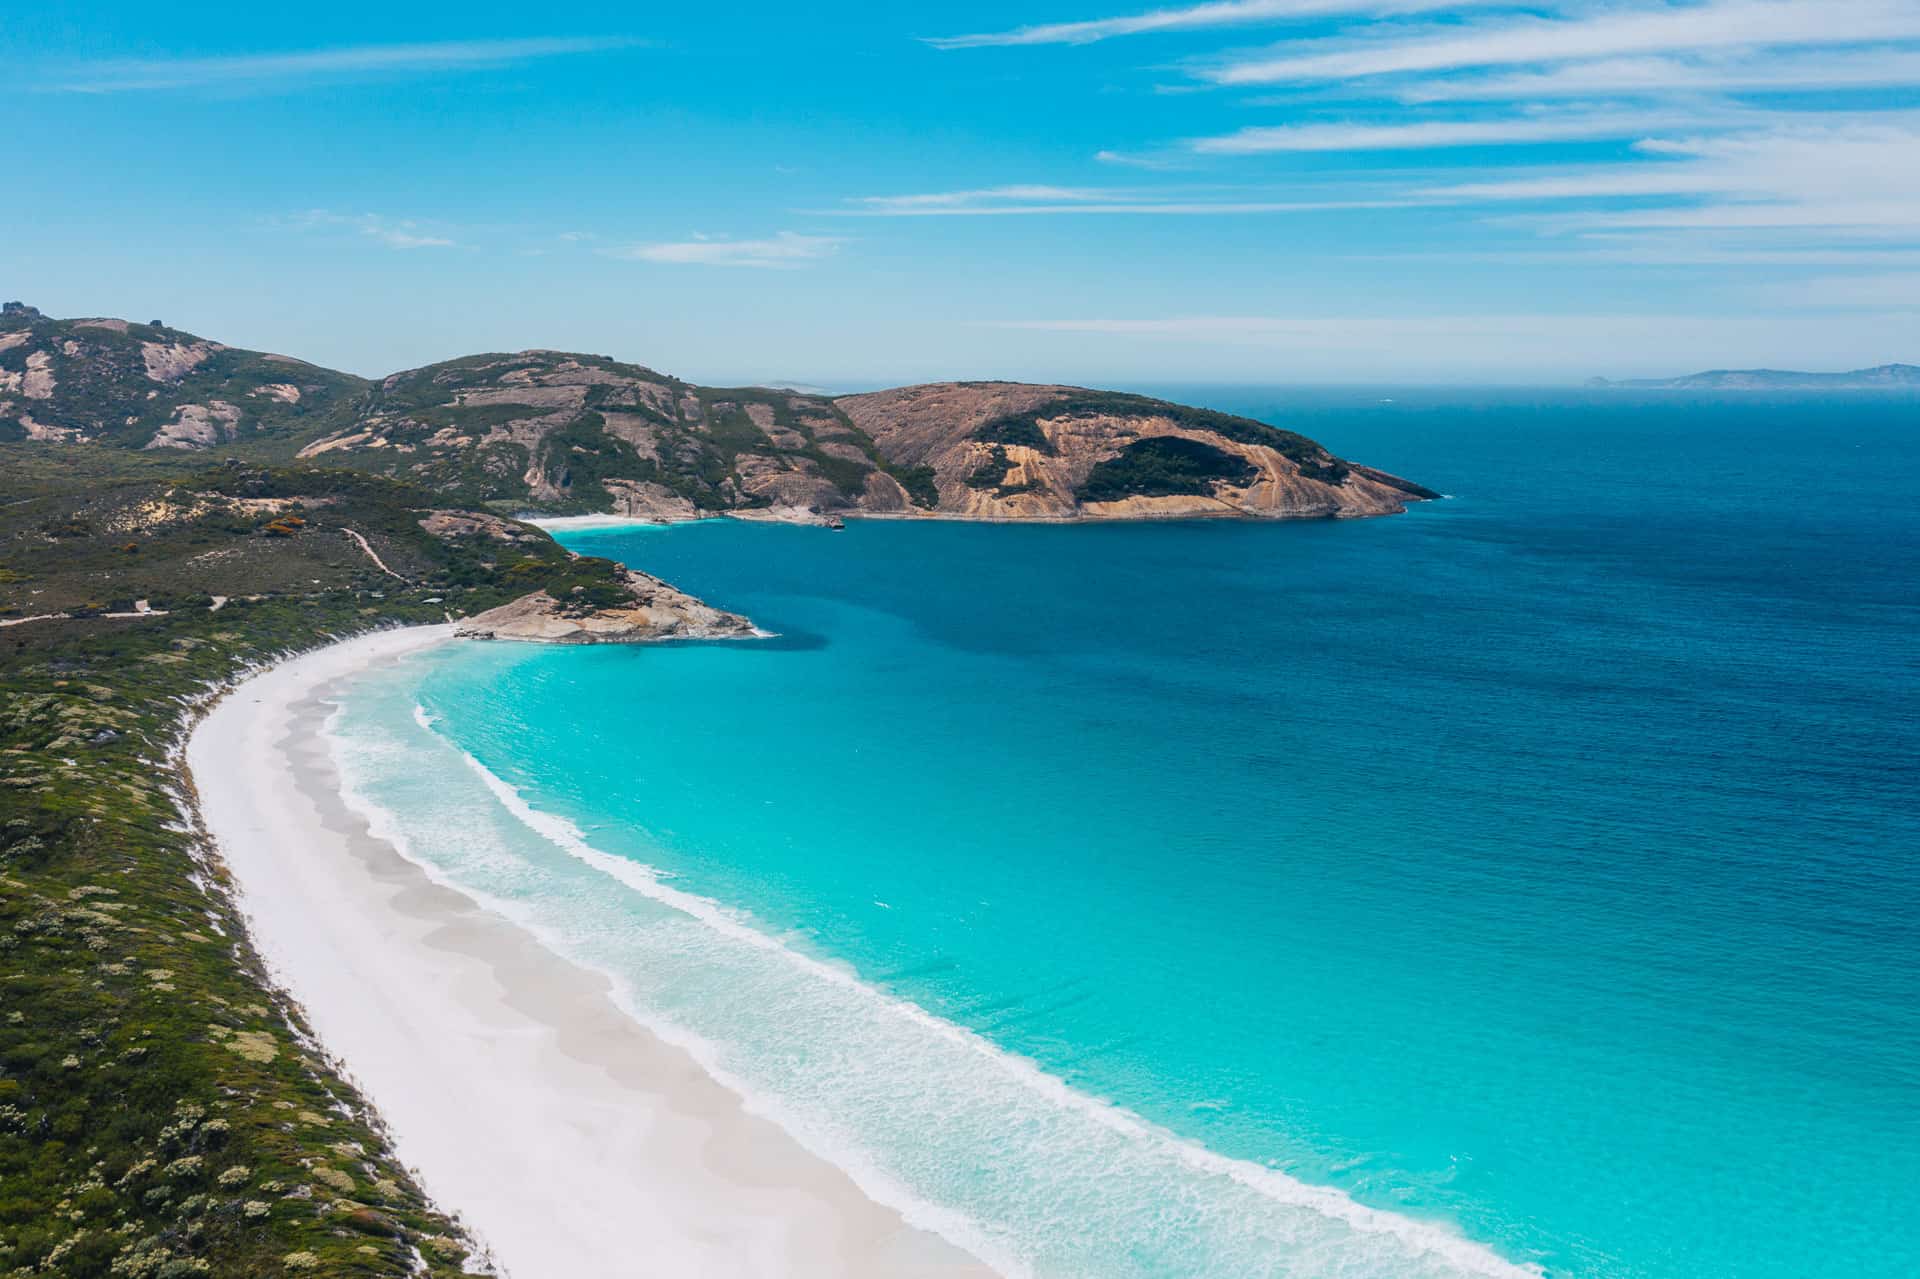 things to do in esperance, what to do in esperance, esperance things to do, esperance attractions, beaches in esperance, hellfire bay, hellfire bay esperance